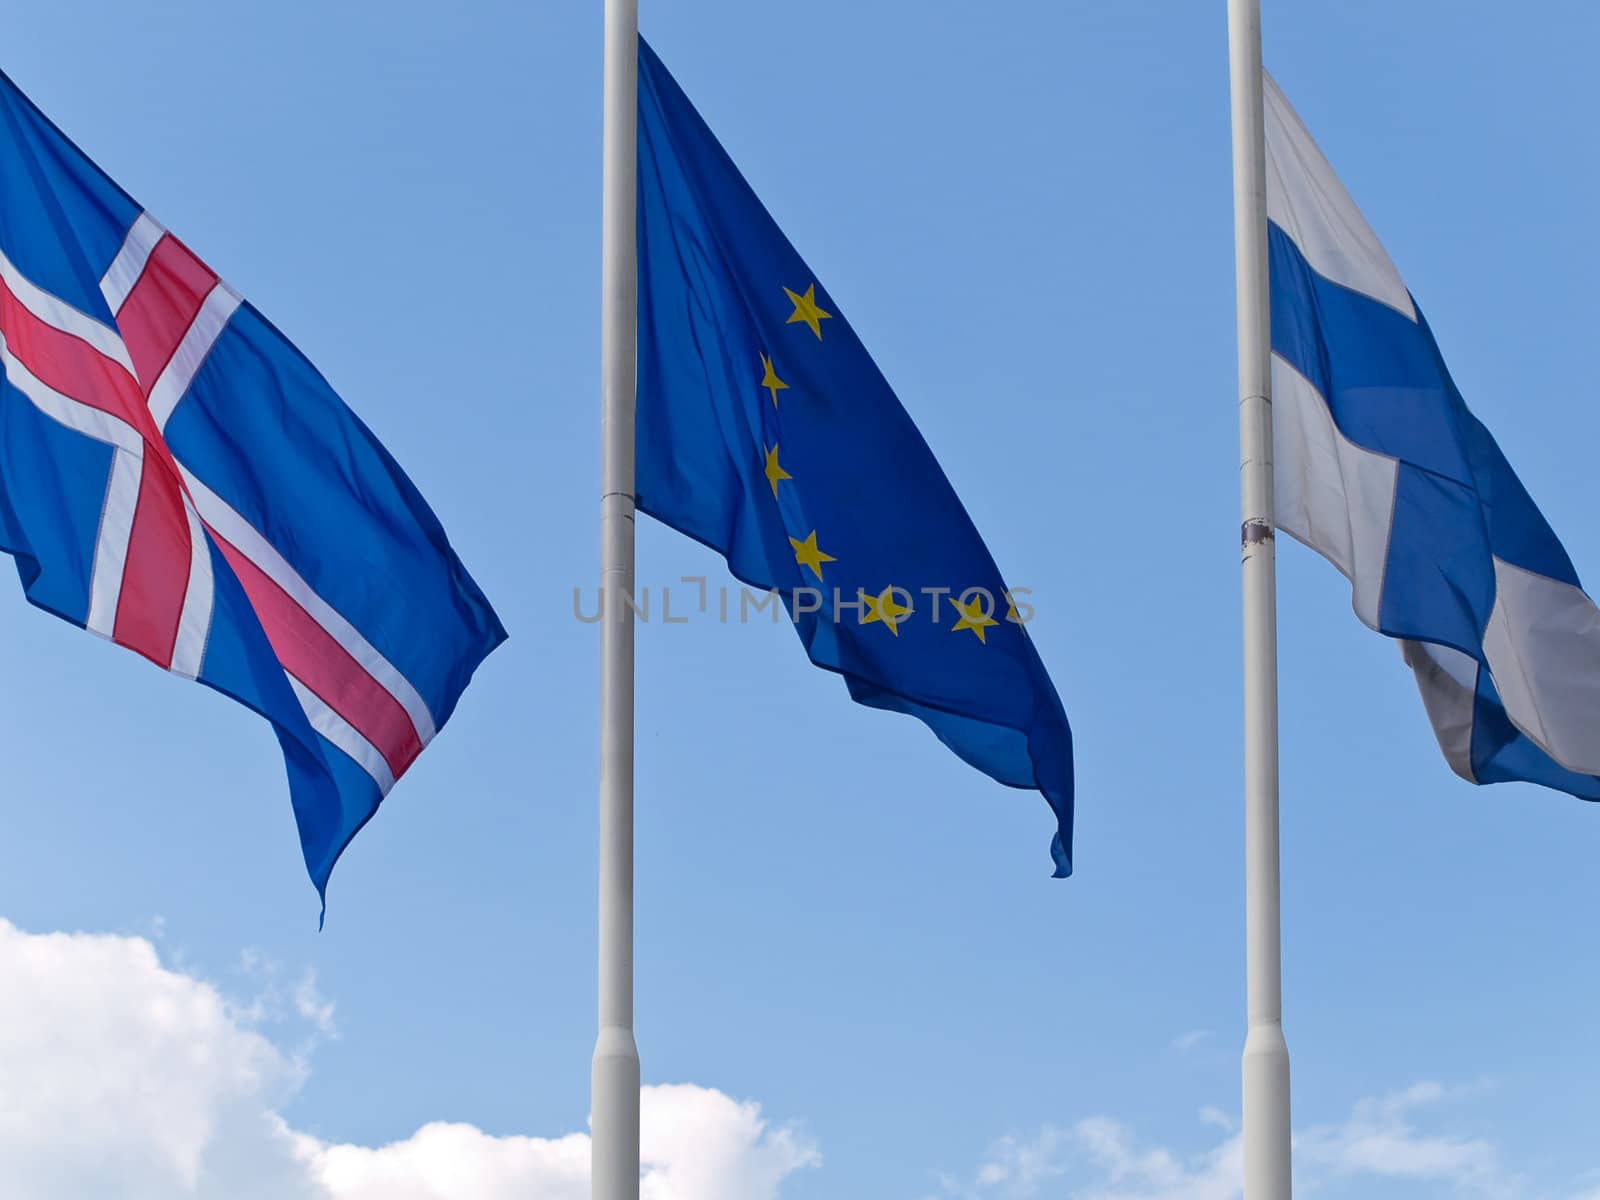 three different flags against the blue sky